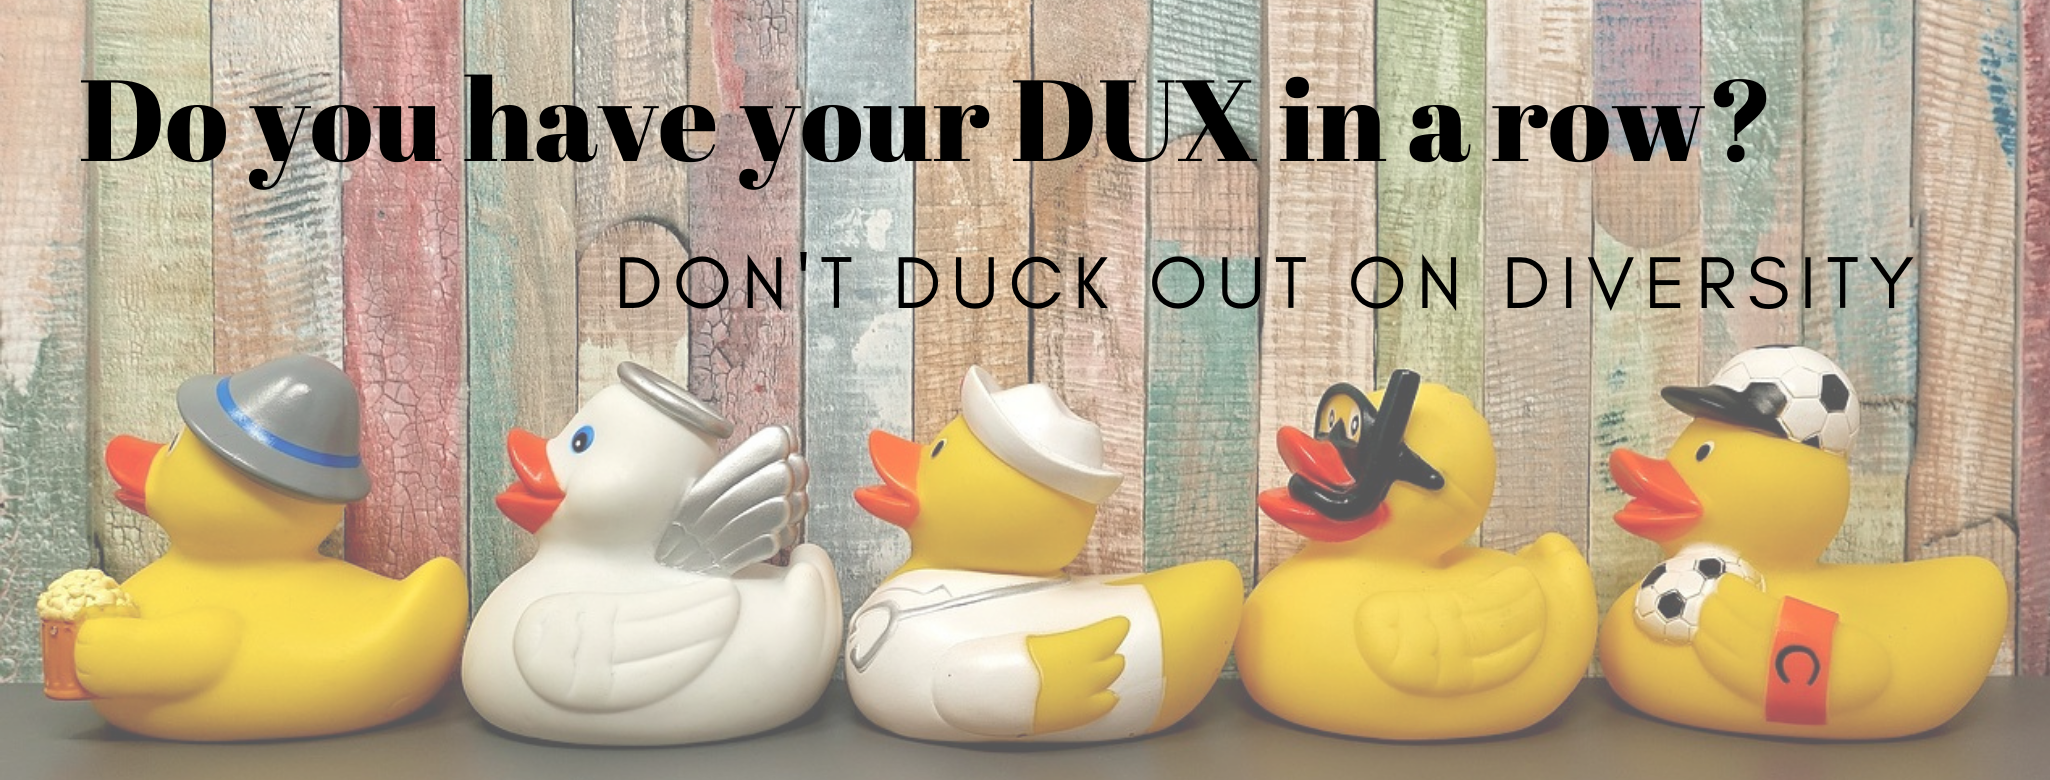 five rubber ducks in a row with the title Do you have your DUX in a row?